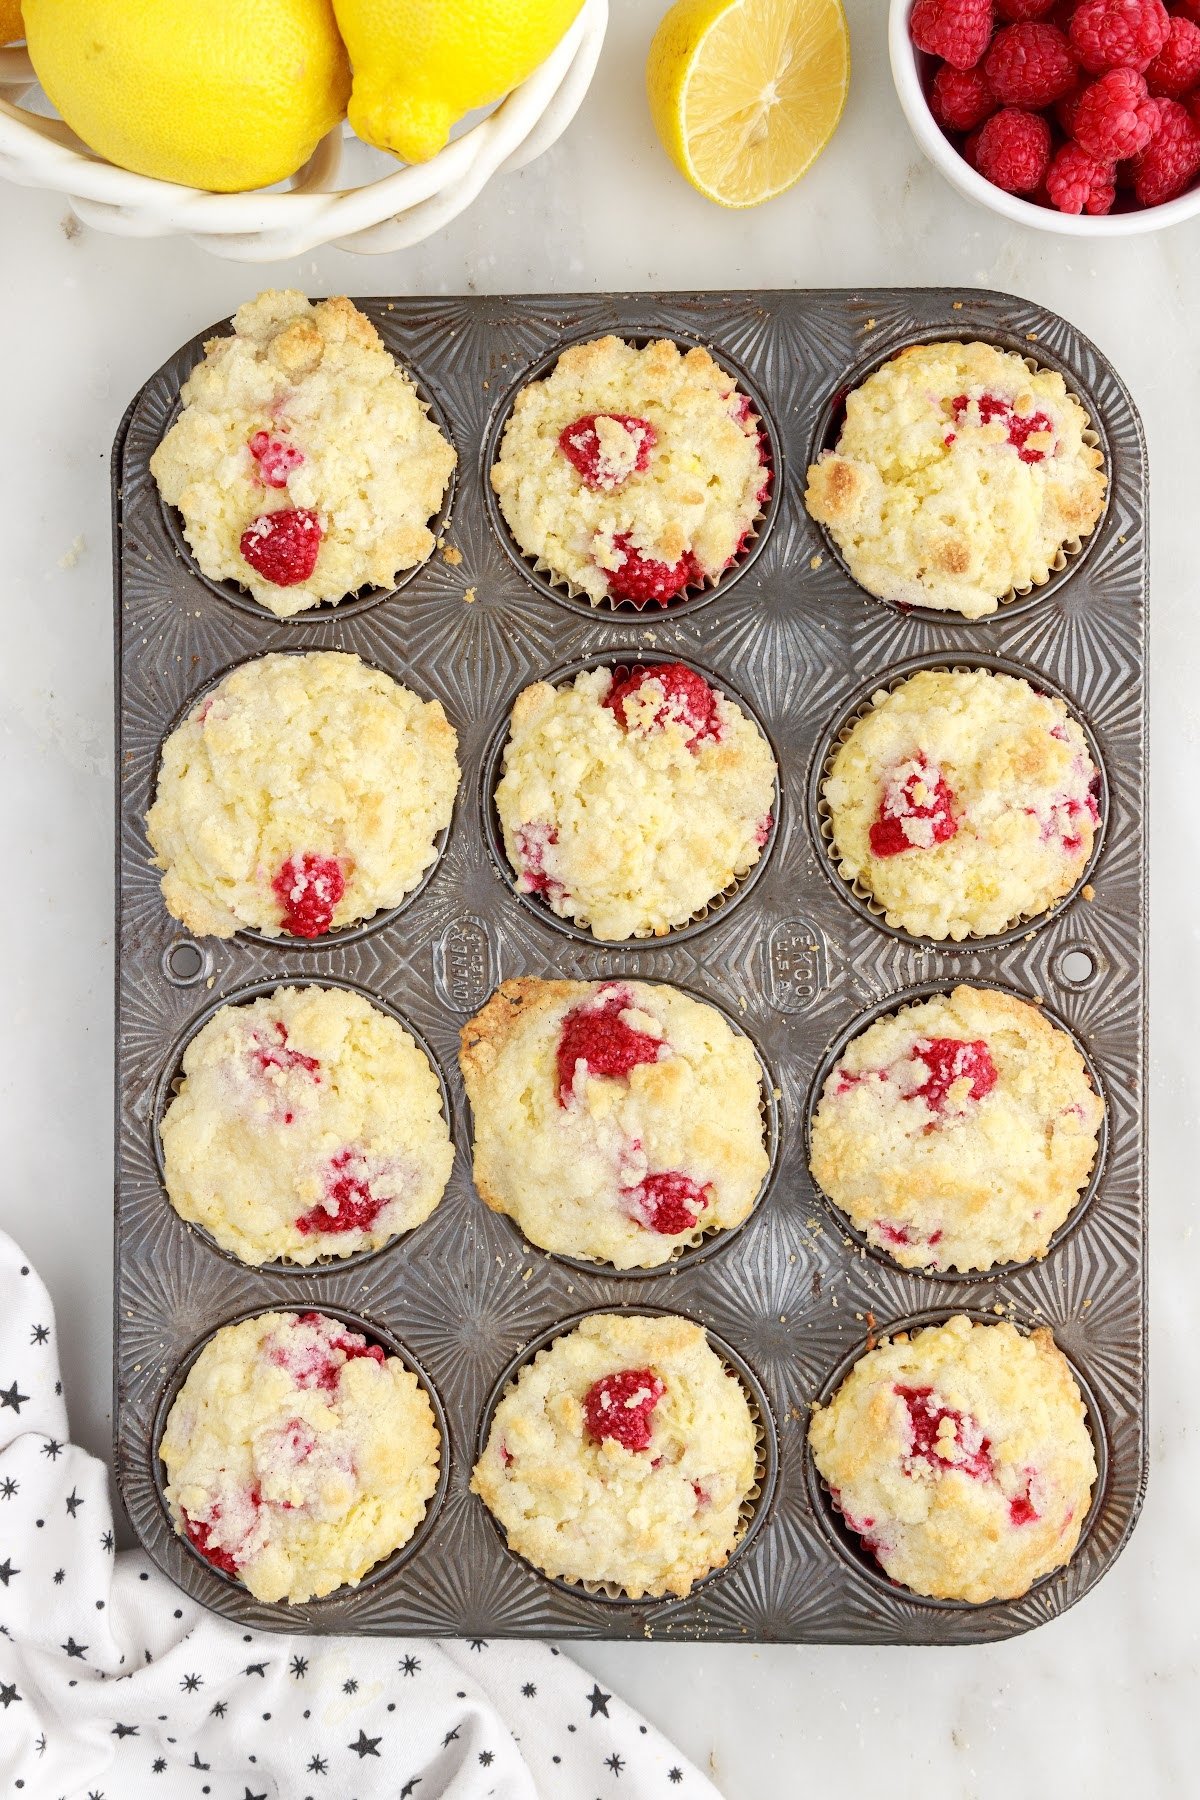 Baked lemon raspberry muffins in muffin tin next to bowl of lemons and bowl of raspberries.